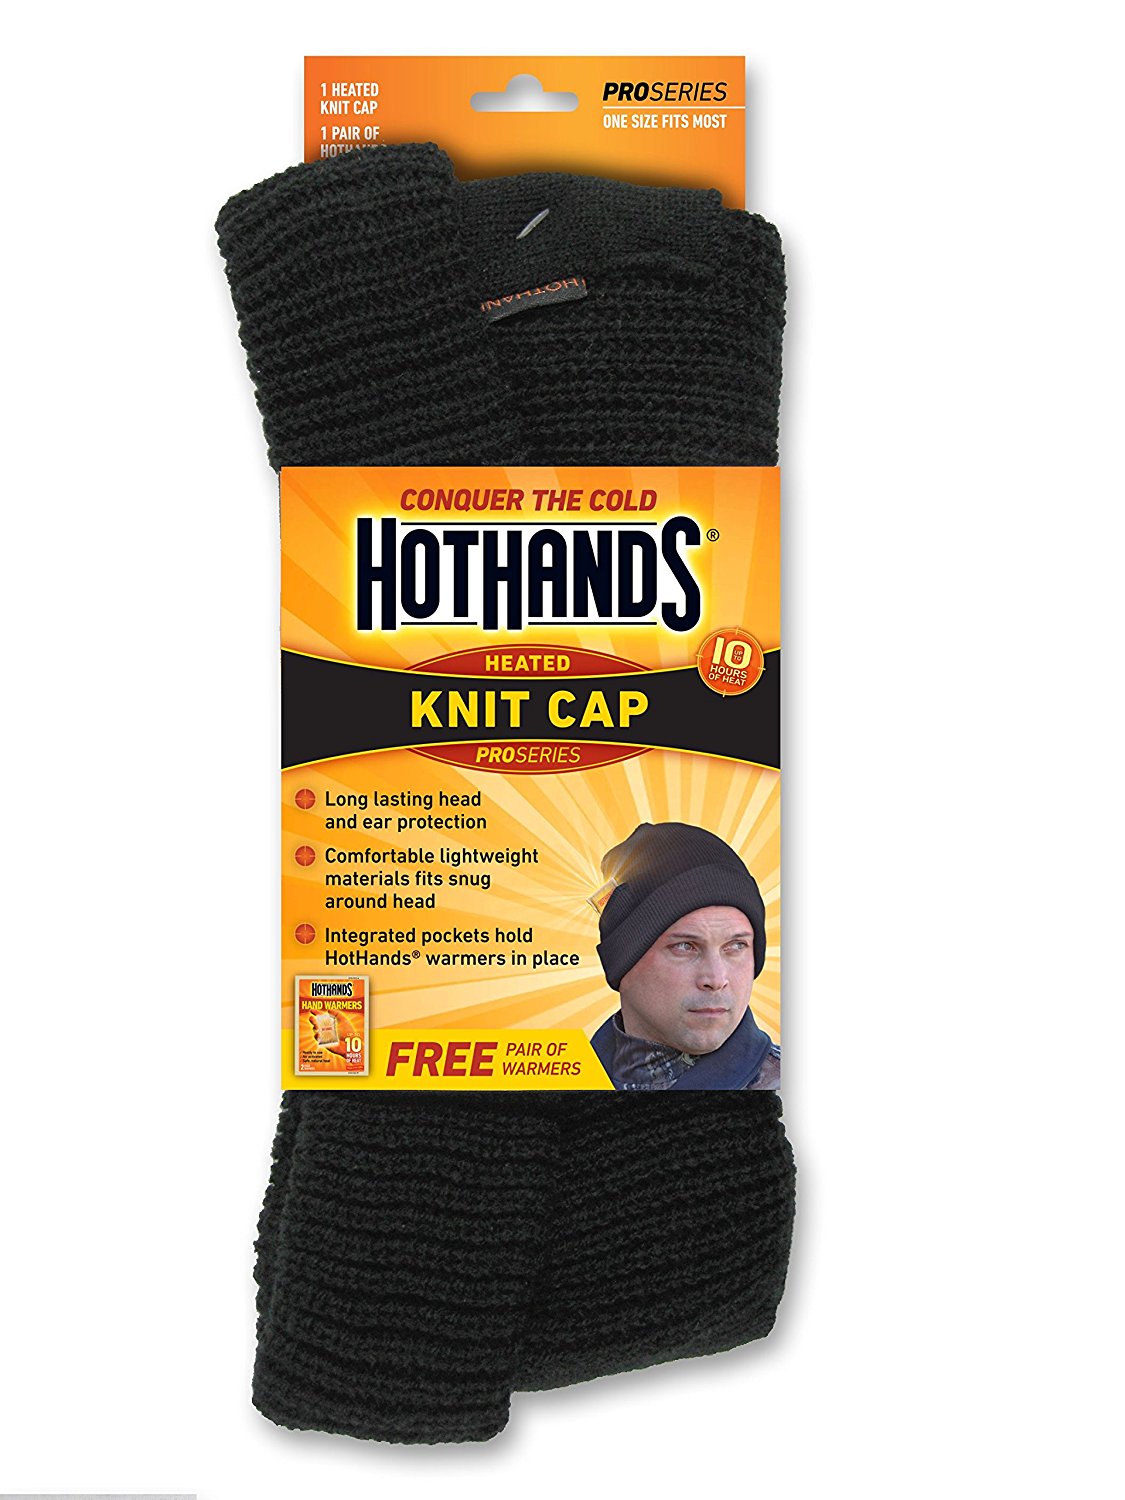 HotHands Heated Knit Cap - 01